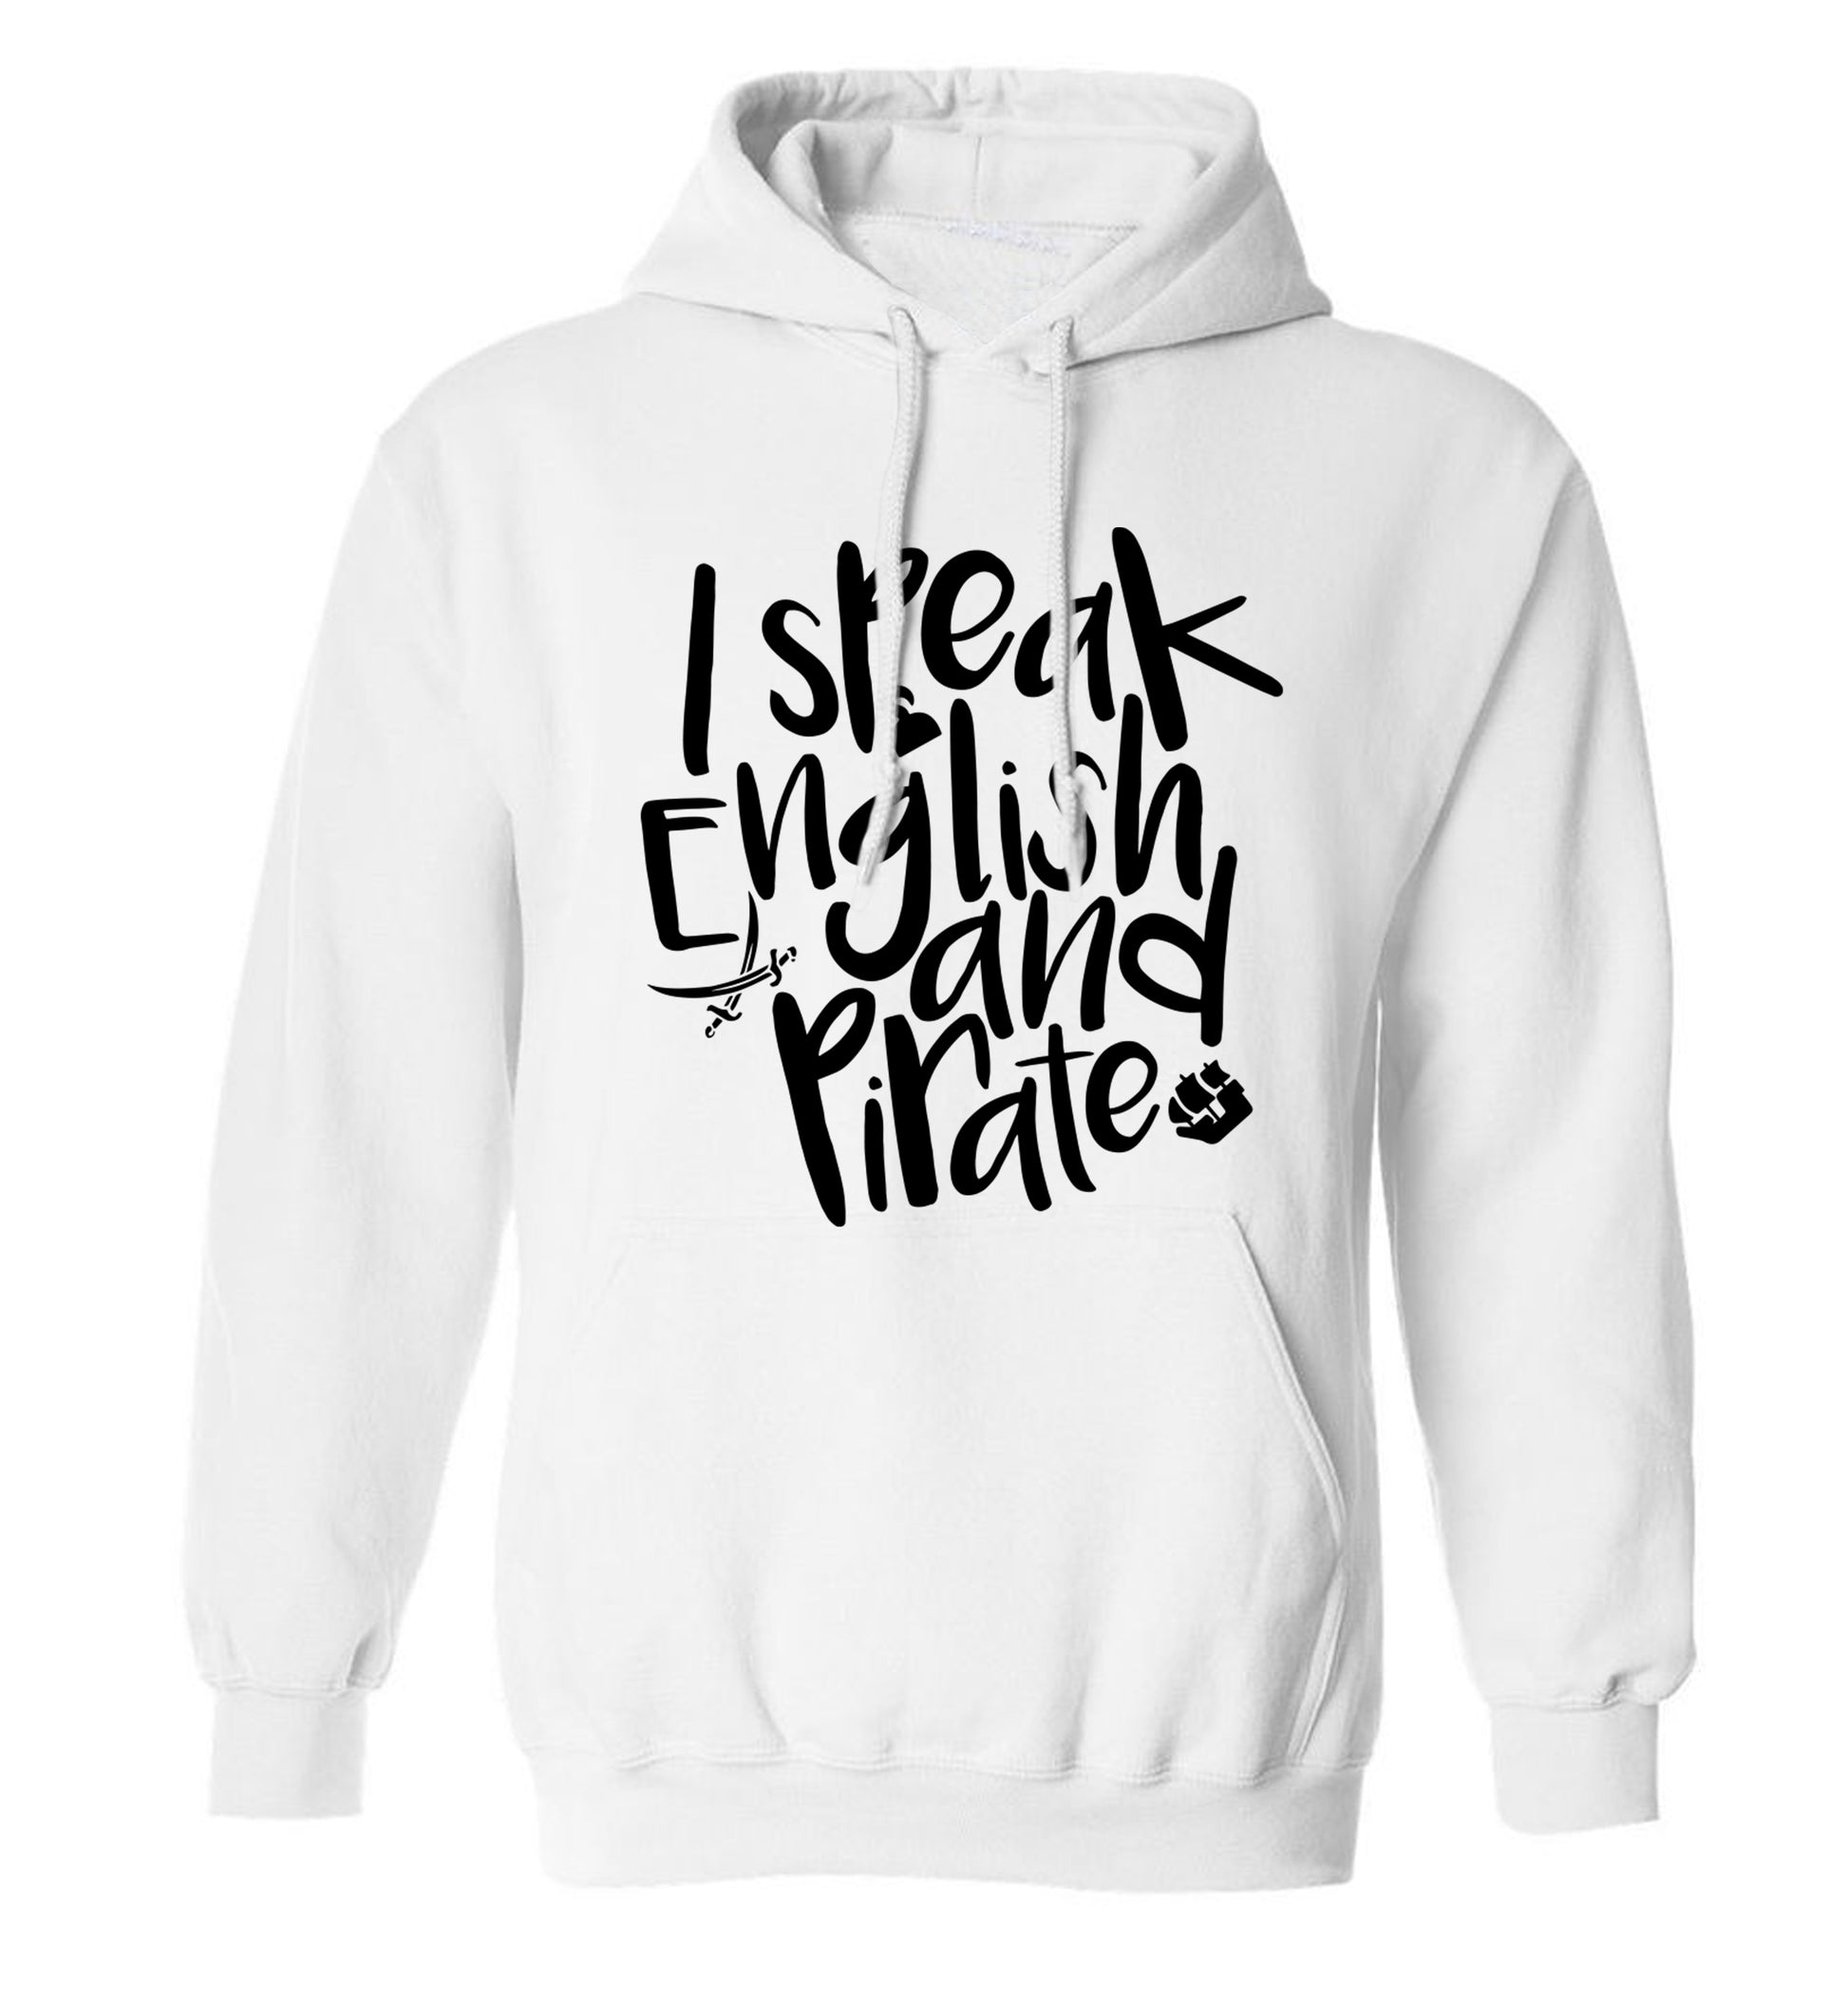 I speak English and pirate adults unisex white hoodie 2XL